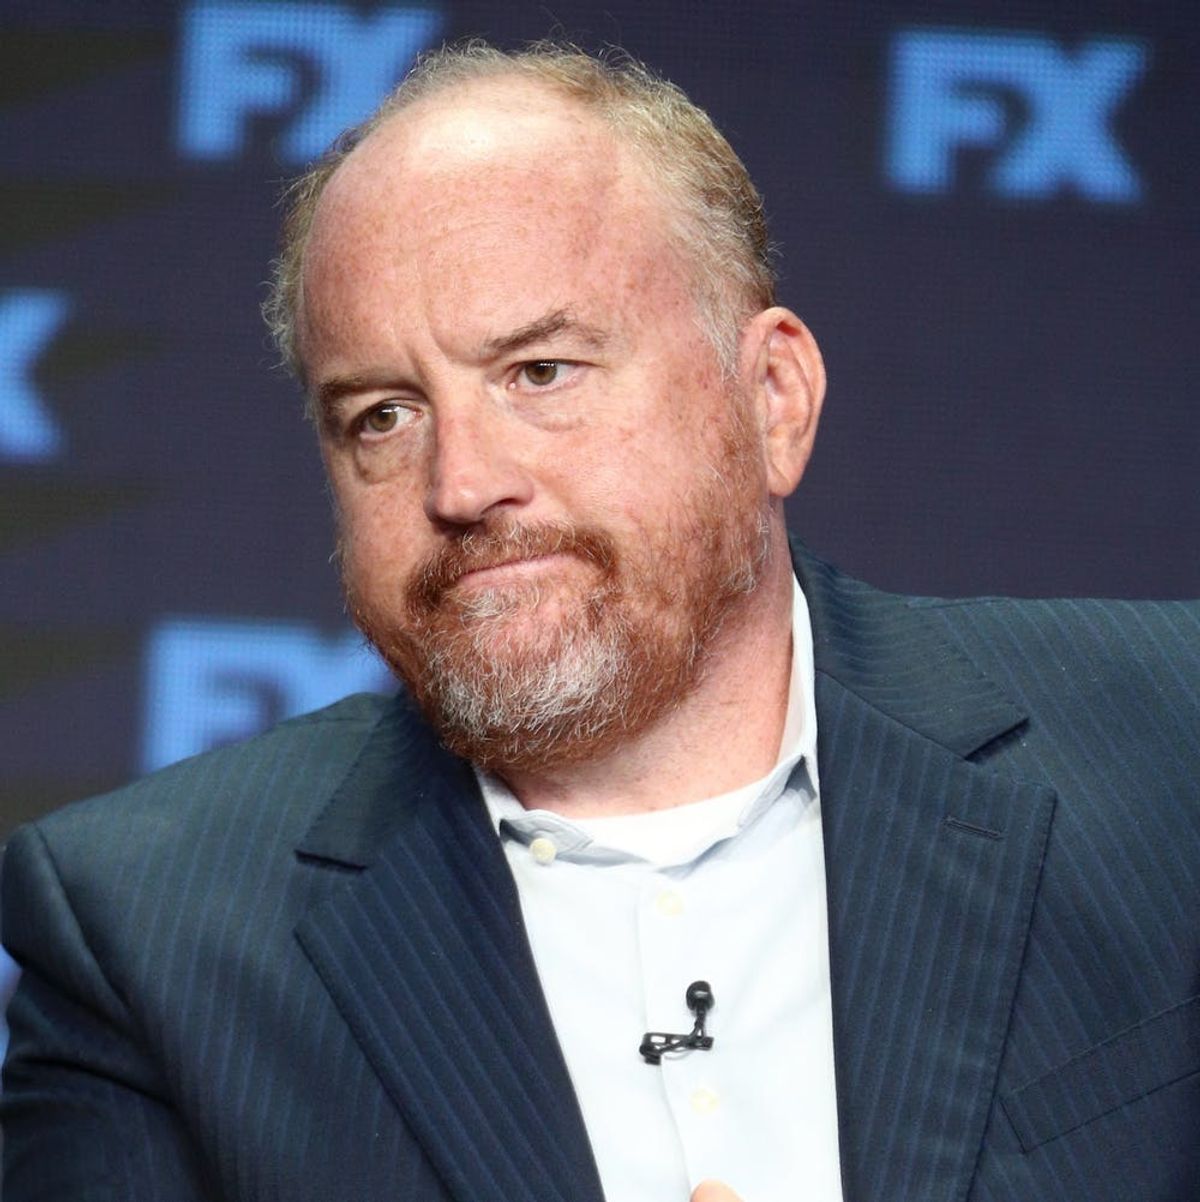 Louis C.K to Buy Back the Rights to I Love You, Daddy for $5 million